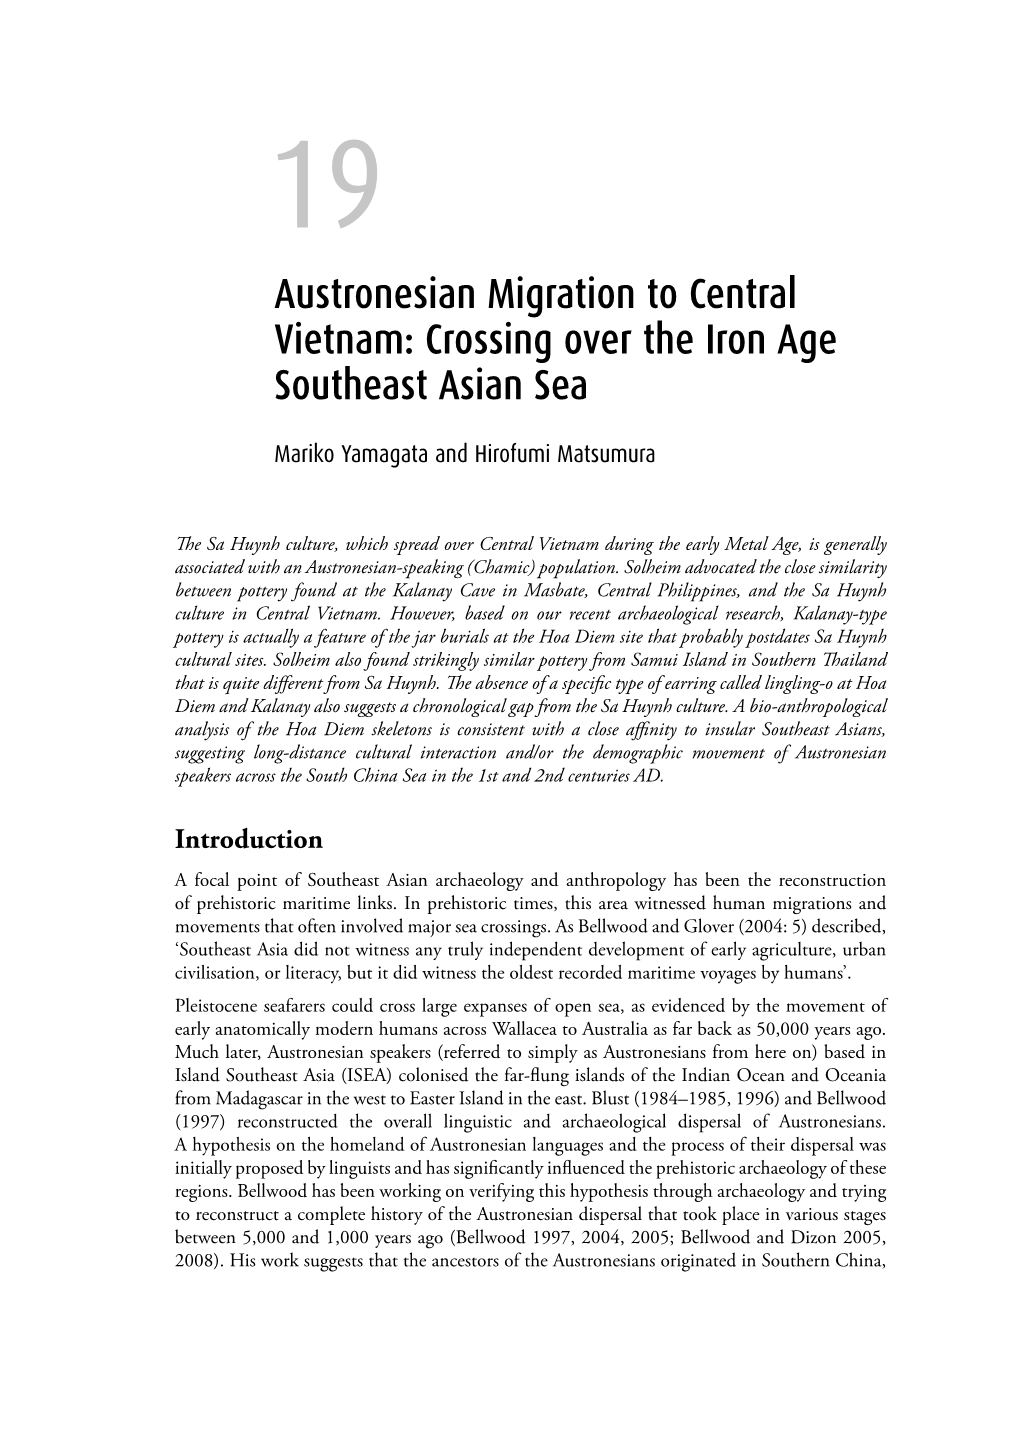 Sa Huynh Culture, Which Spread Over Central Vietnam During the Early Metal Age, Is Generally Associated with an Austronesian-Speaking (Chamic) Population